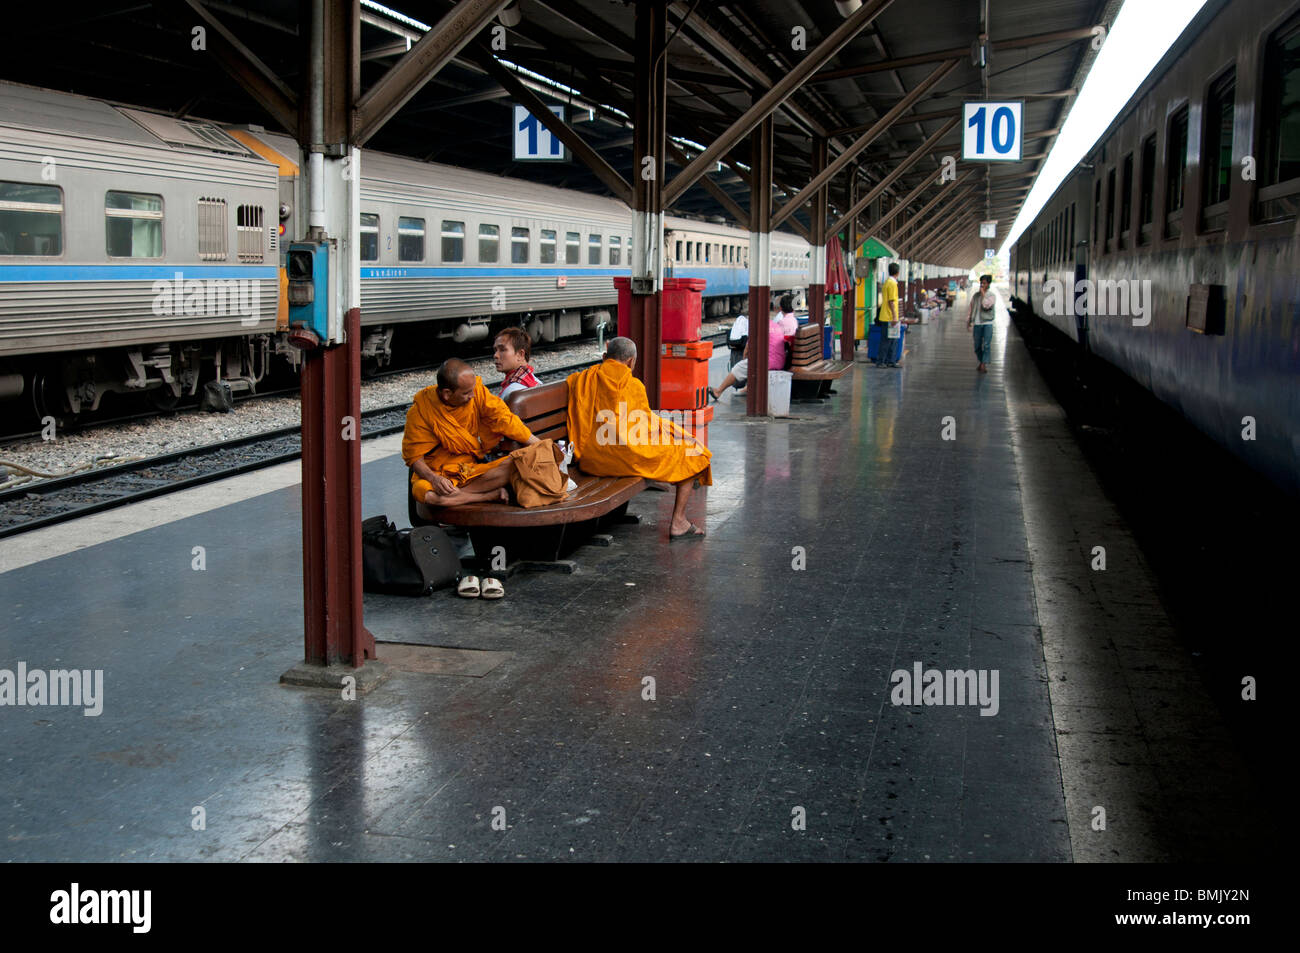 Buddhist monks wait for their train in Bangkok's Hualamphong  station Thailand Stock Photo